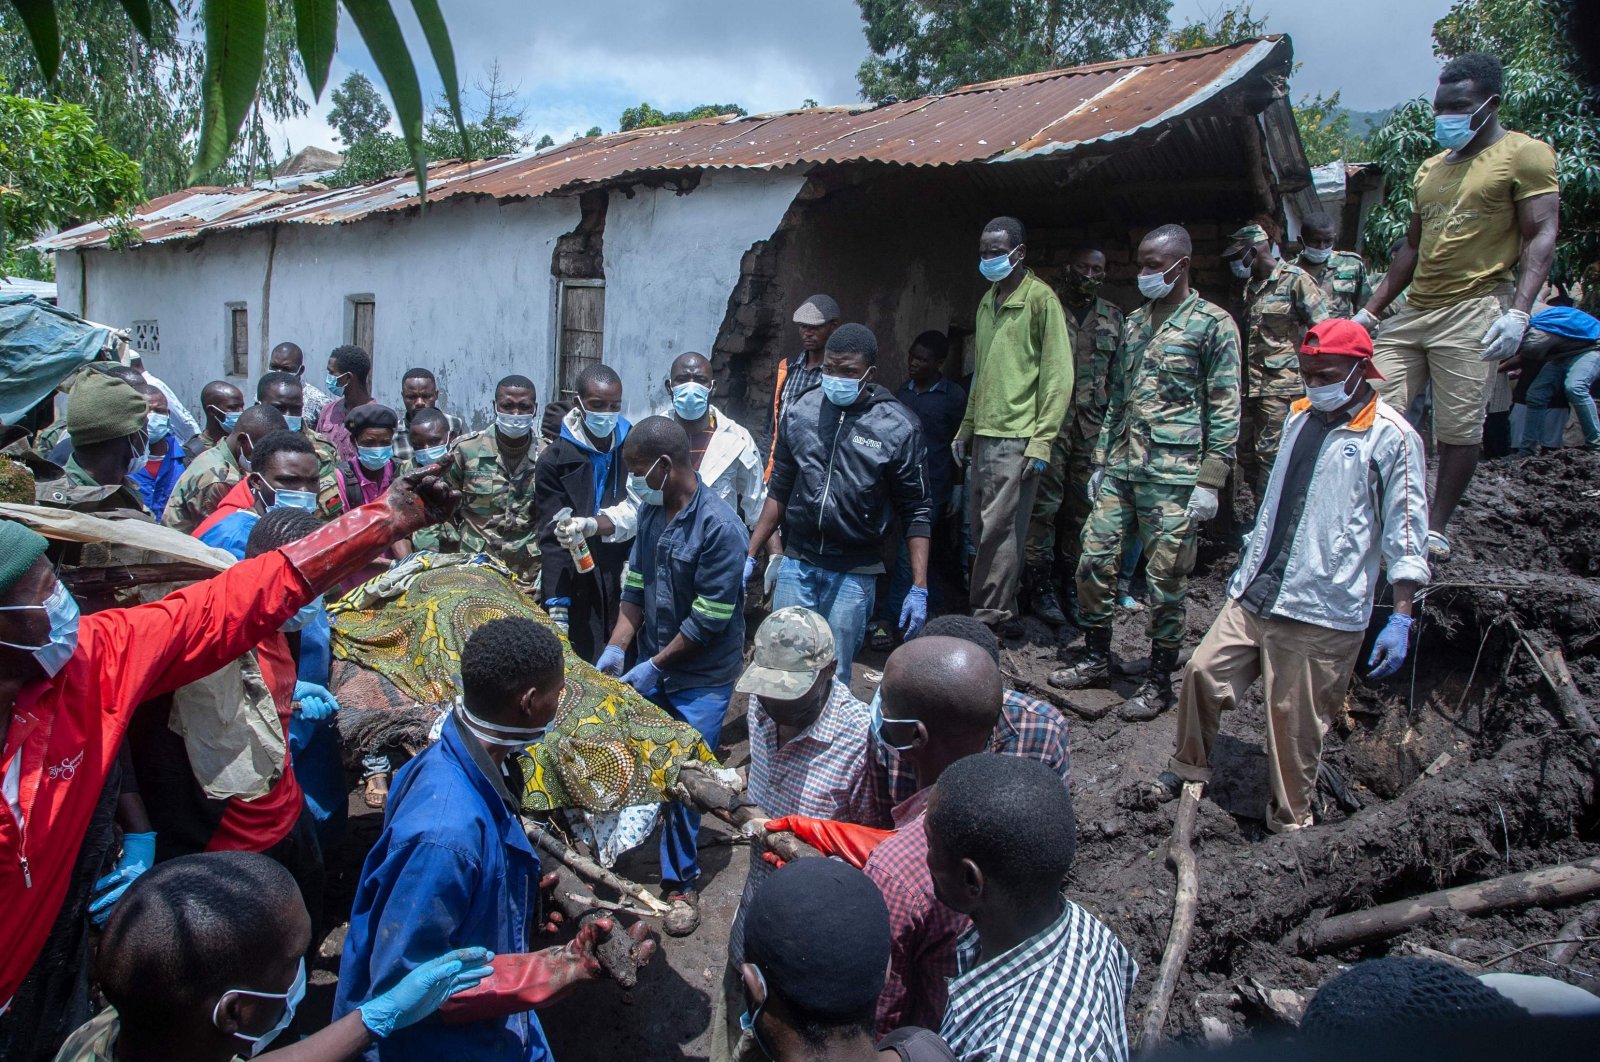 Malawi Defence Force (MDF) soldiers recover a body of a victim of landslide which resulted due to heavy rains from Cyclone Freddy during a rescue operation at Manje informal settlement, Blantyre, Malawi, March 16, 2023. (AFP Photo)